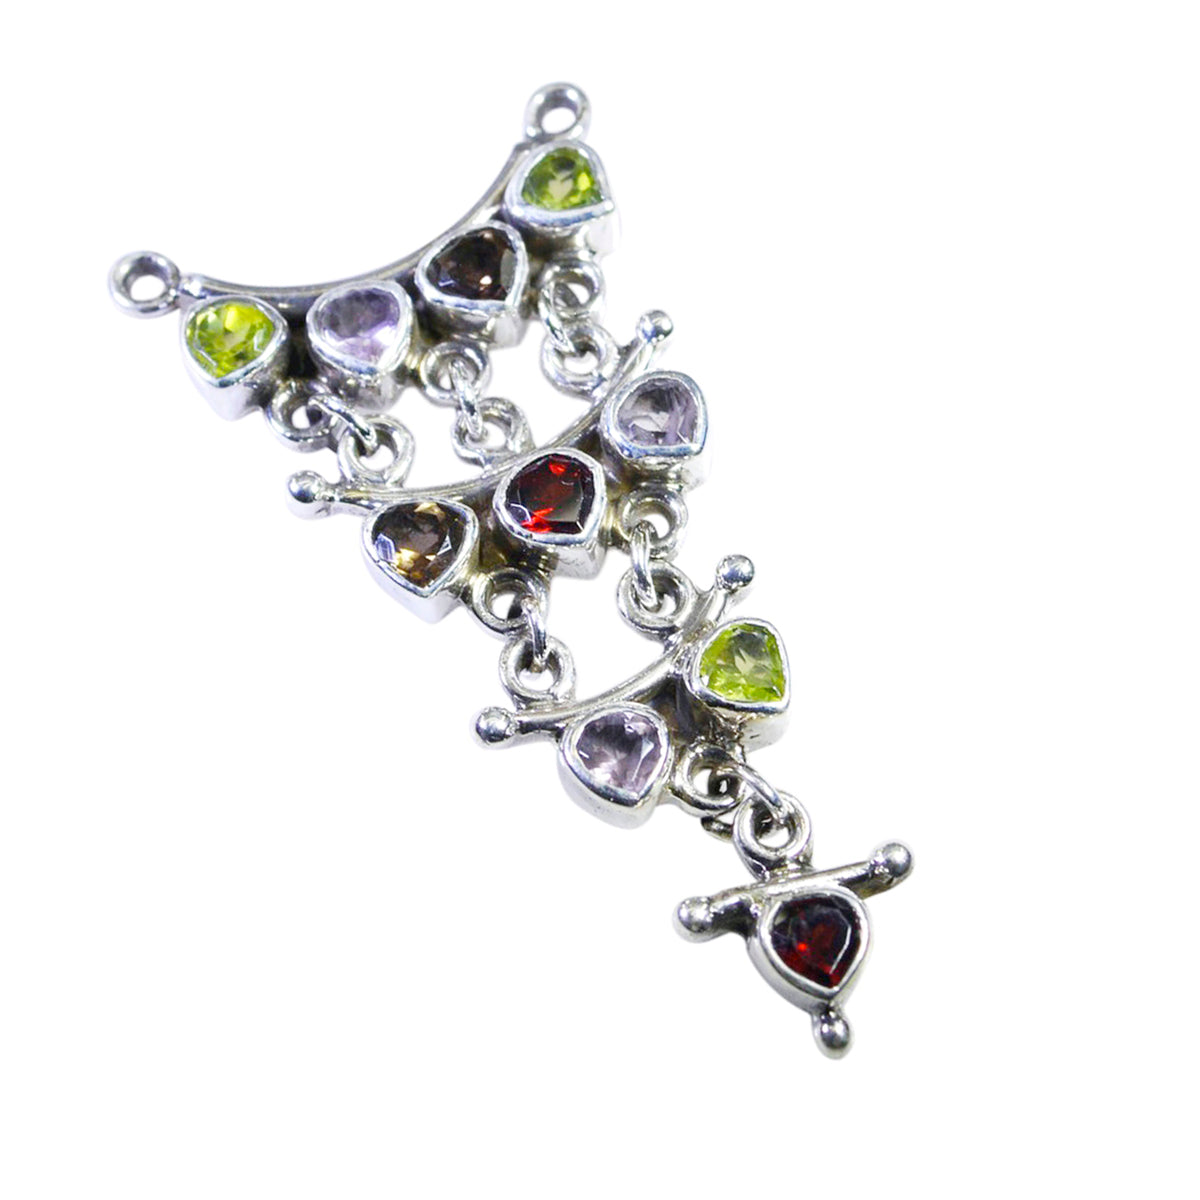 Riyo Delightful Gemstone Heart Faceted Multi Color Multi Stone 1210 Sterling Silver Pendant Gift For Good Friday